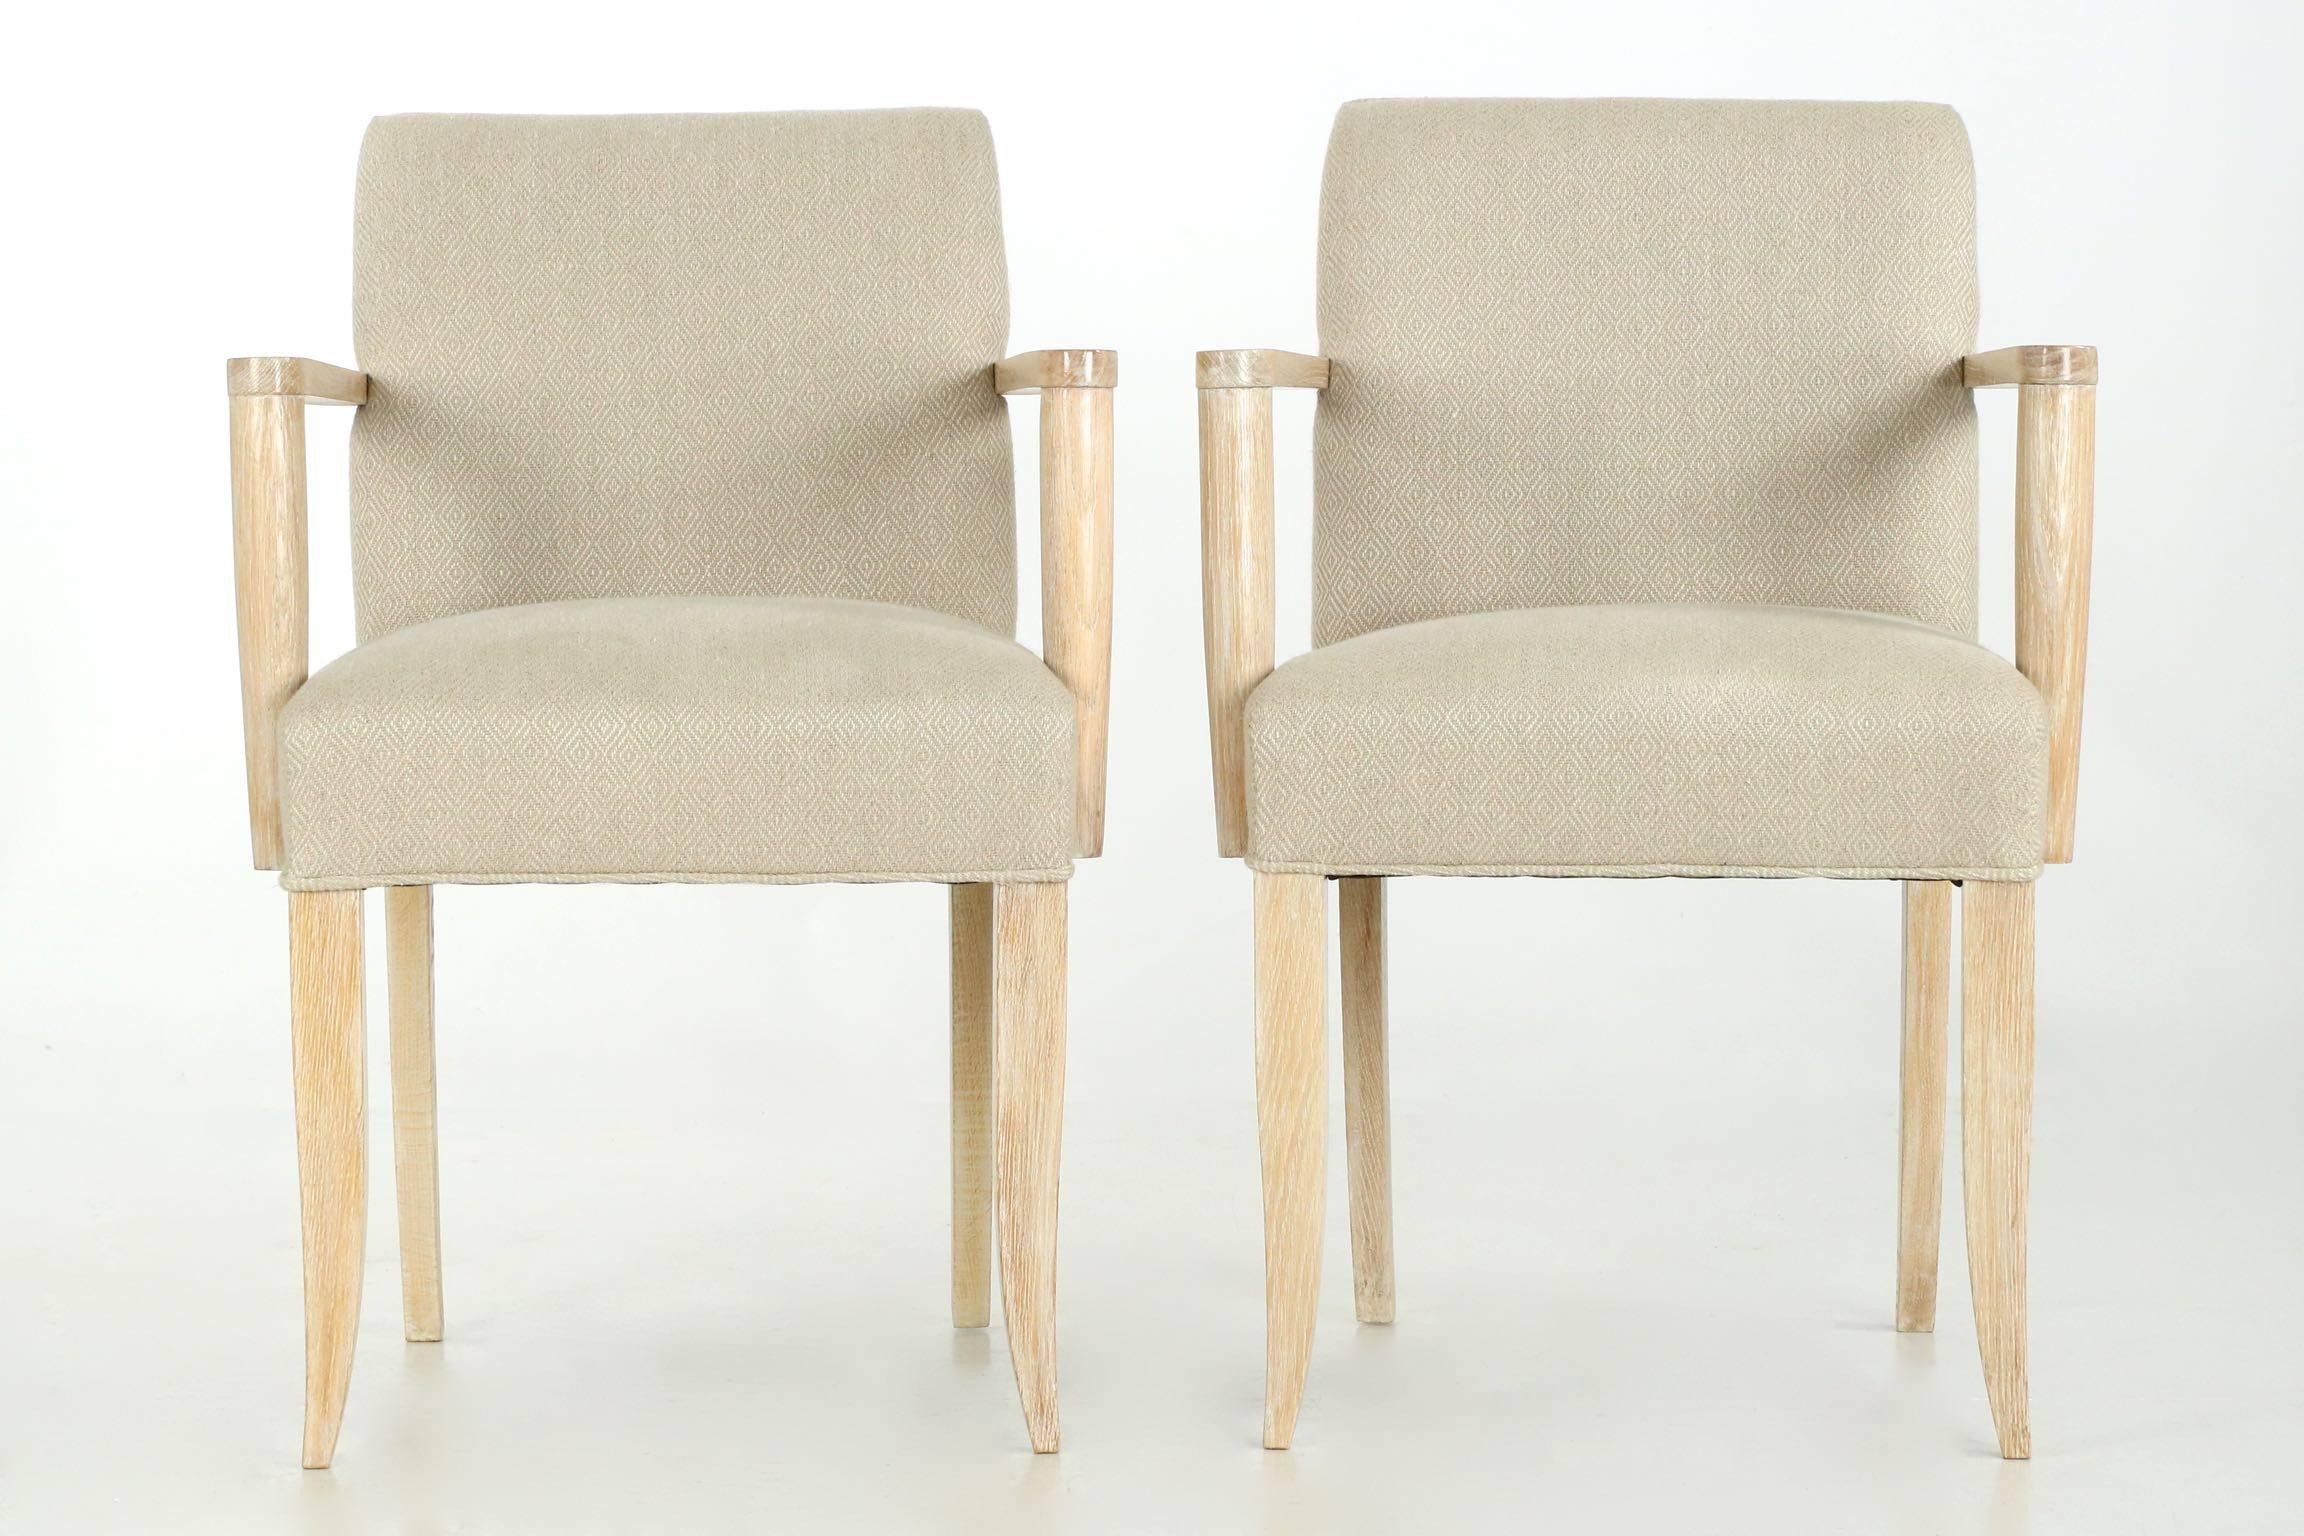 Incredibly pleasing in every sense, this fine pair of French modern cerused oak arm chairs is upholstered in a patterned woven tweed that is deeply comfortable. Crisp in lines and crafted with skill, they are quite sturdy and built to last